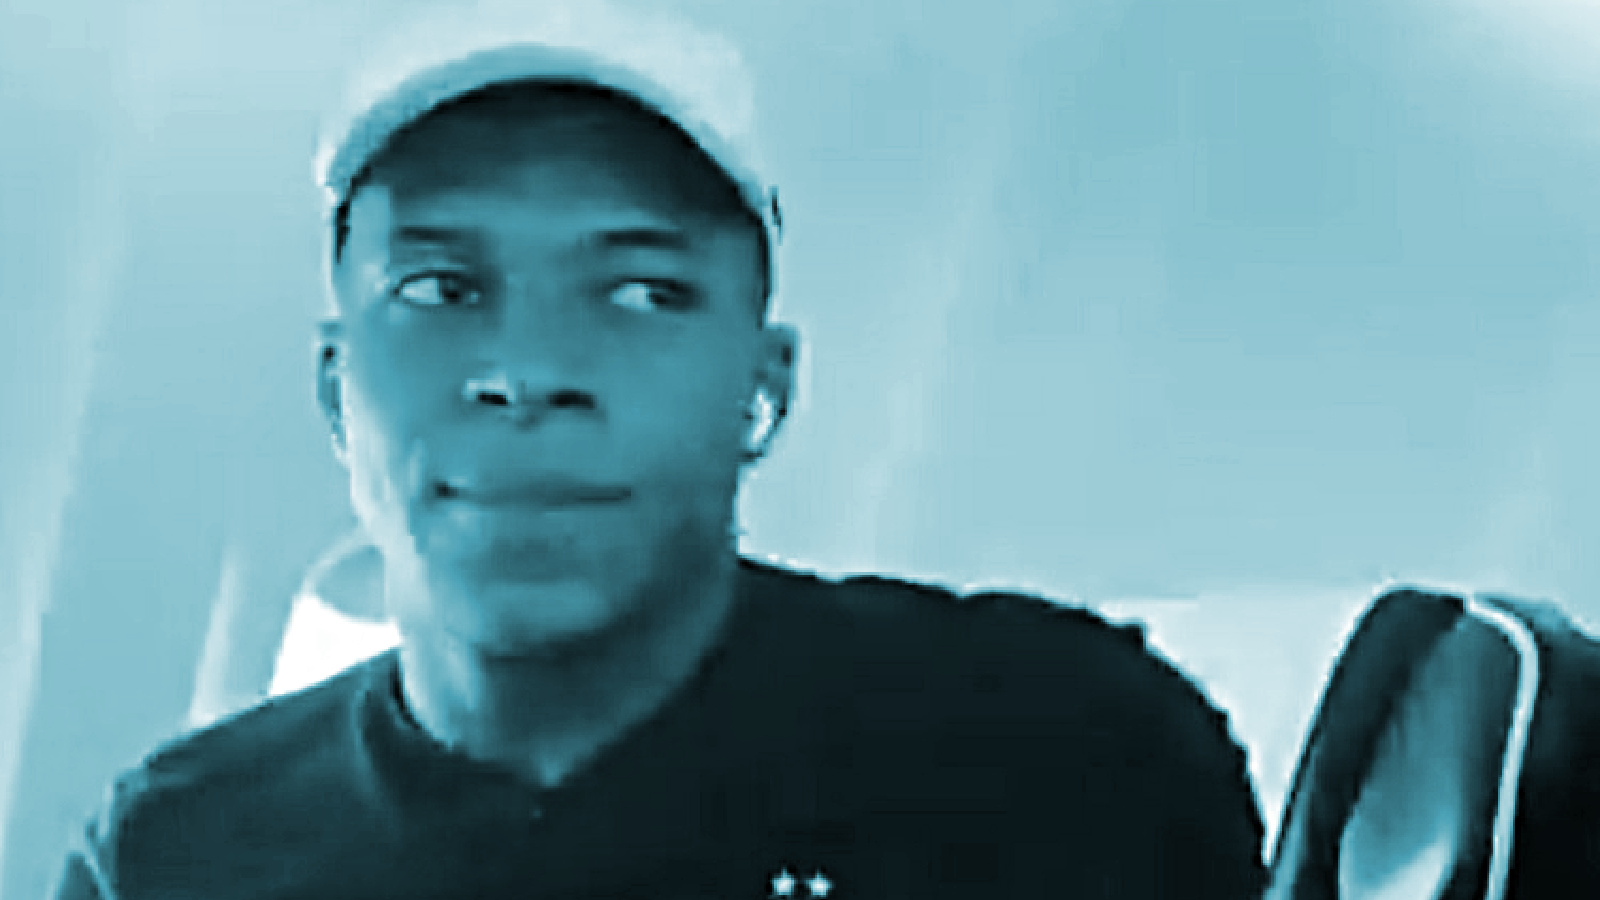 Video: Kylian Mbappe reacts to being a Newcastle player on Football Manager